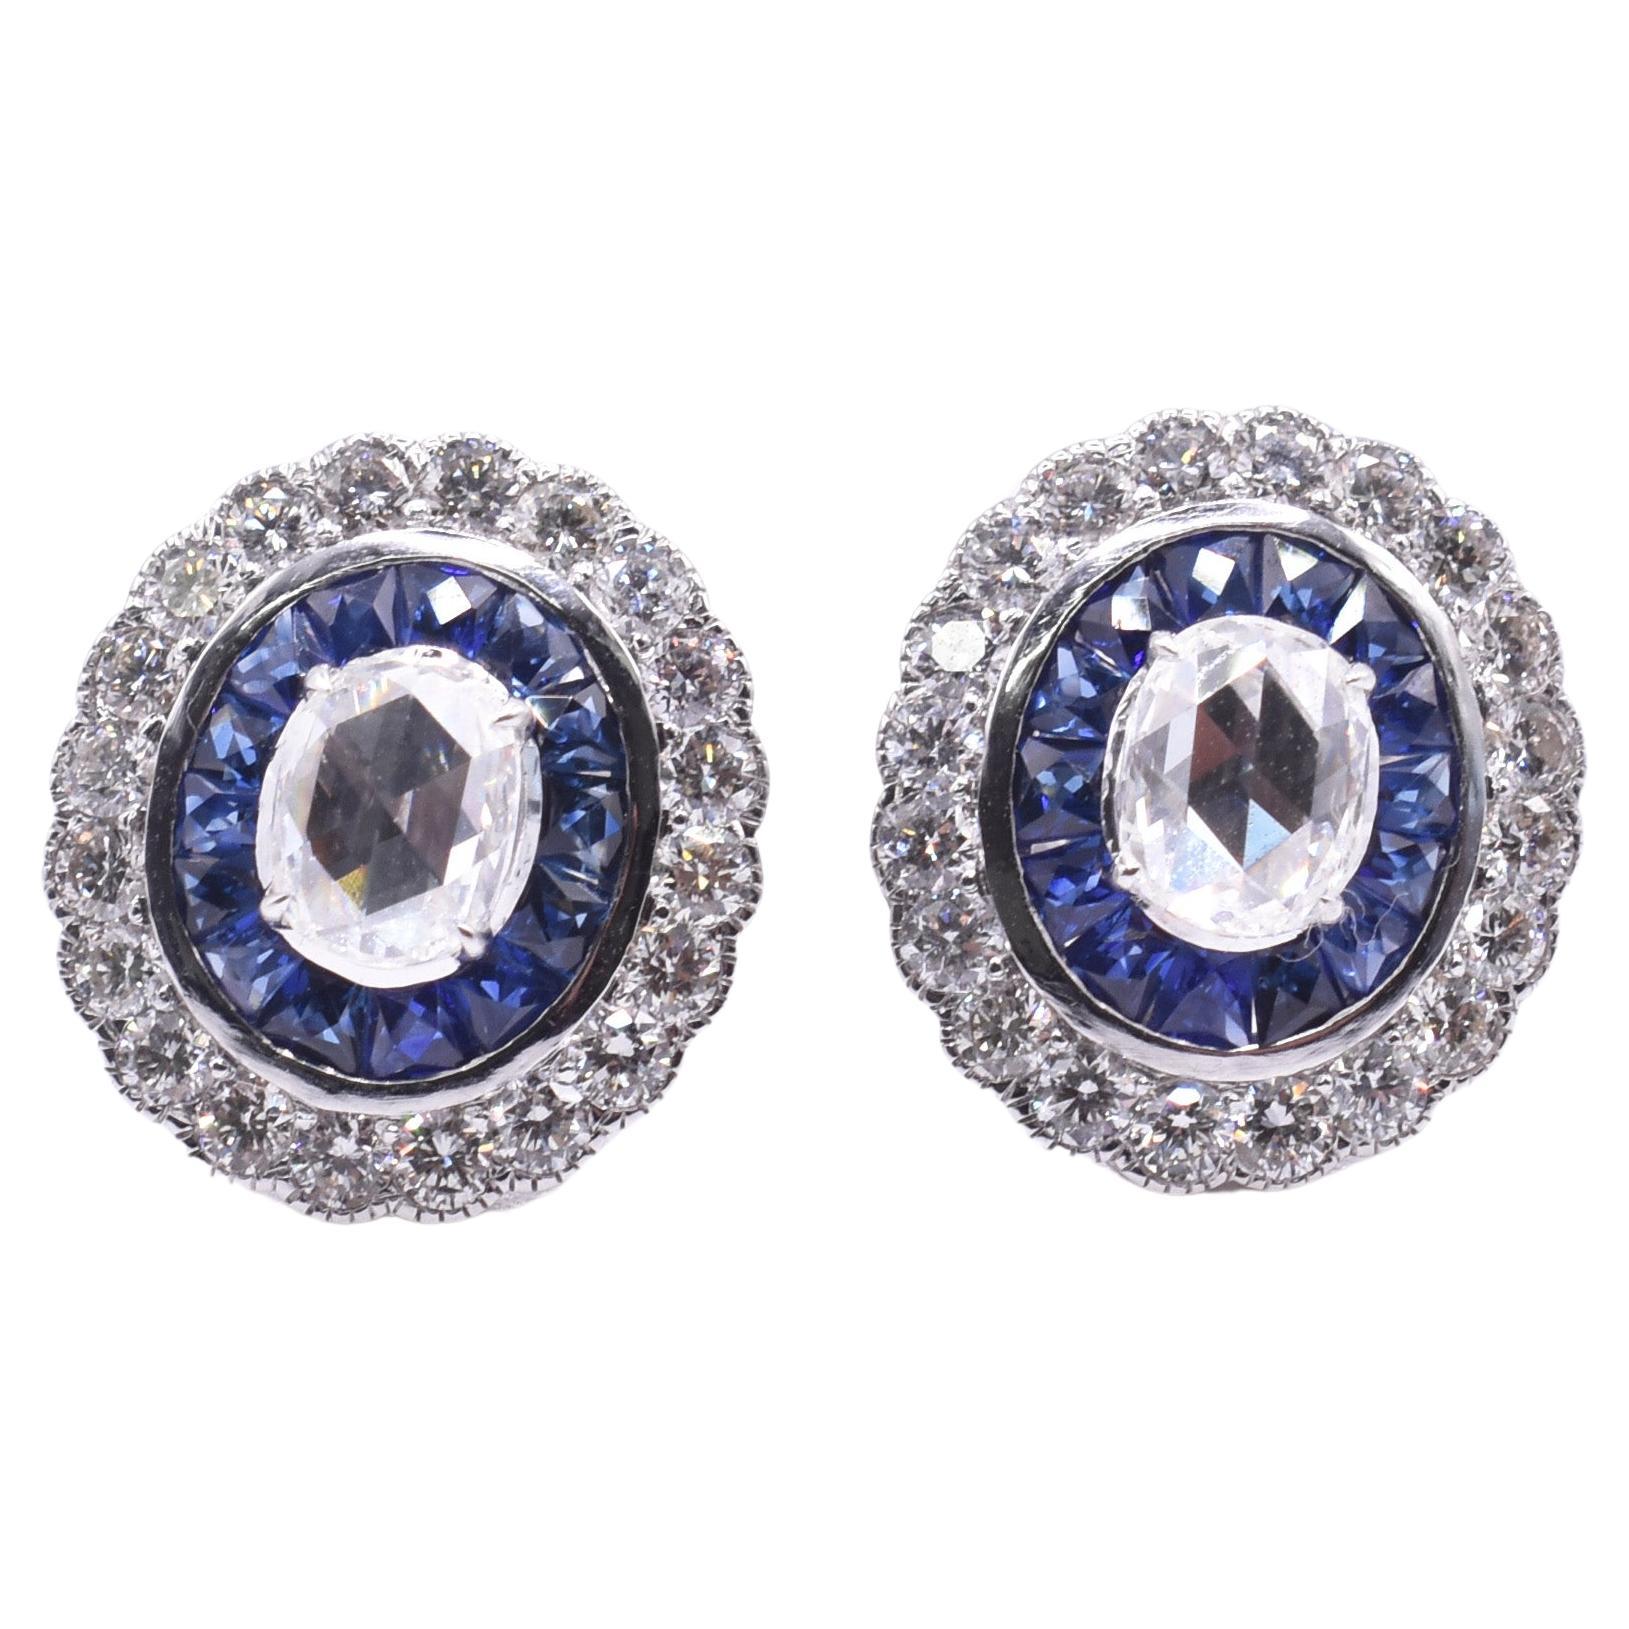 Pair of 18k Art Deco Style White Gold Diamond and Sapphire Stud Earrings For Sale